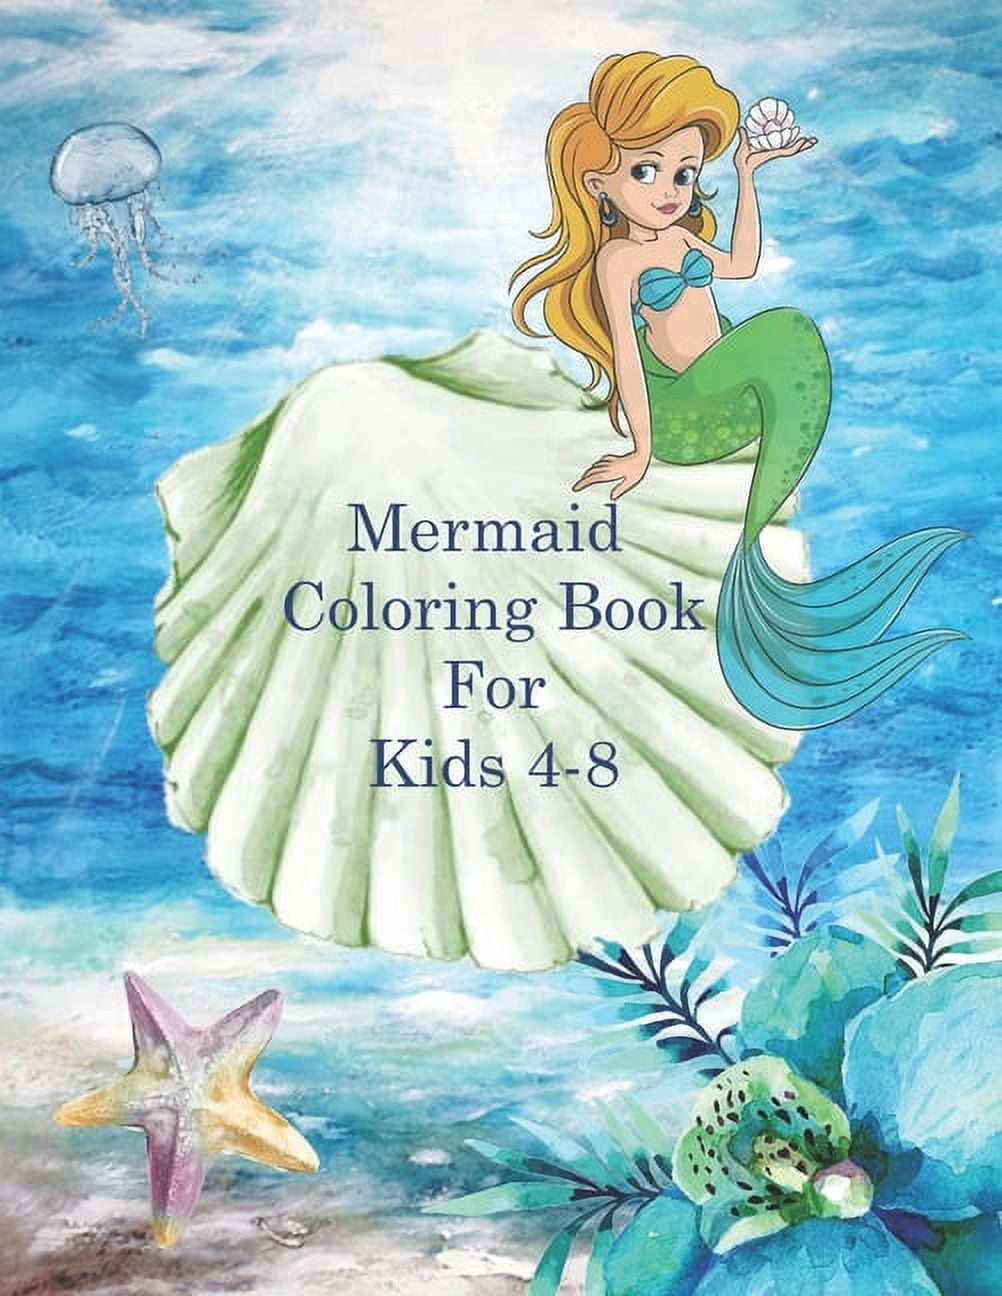 Mermaid Coloring Book For Kids 4-8: A Variety of 65 Single-Sided Underwater  Designs with Mythical Mermaids And Other Sea Creatures Paperback 1687504539  9781687504531 Glenda Fieldstone 